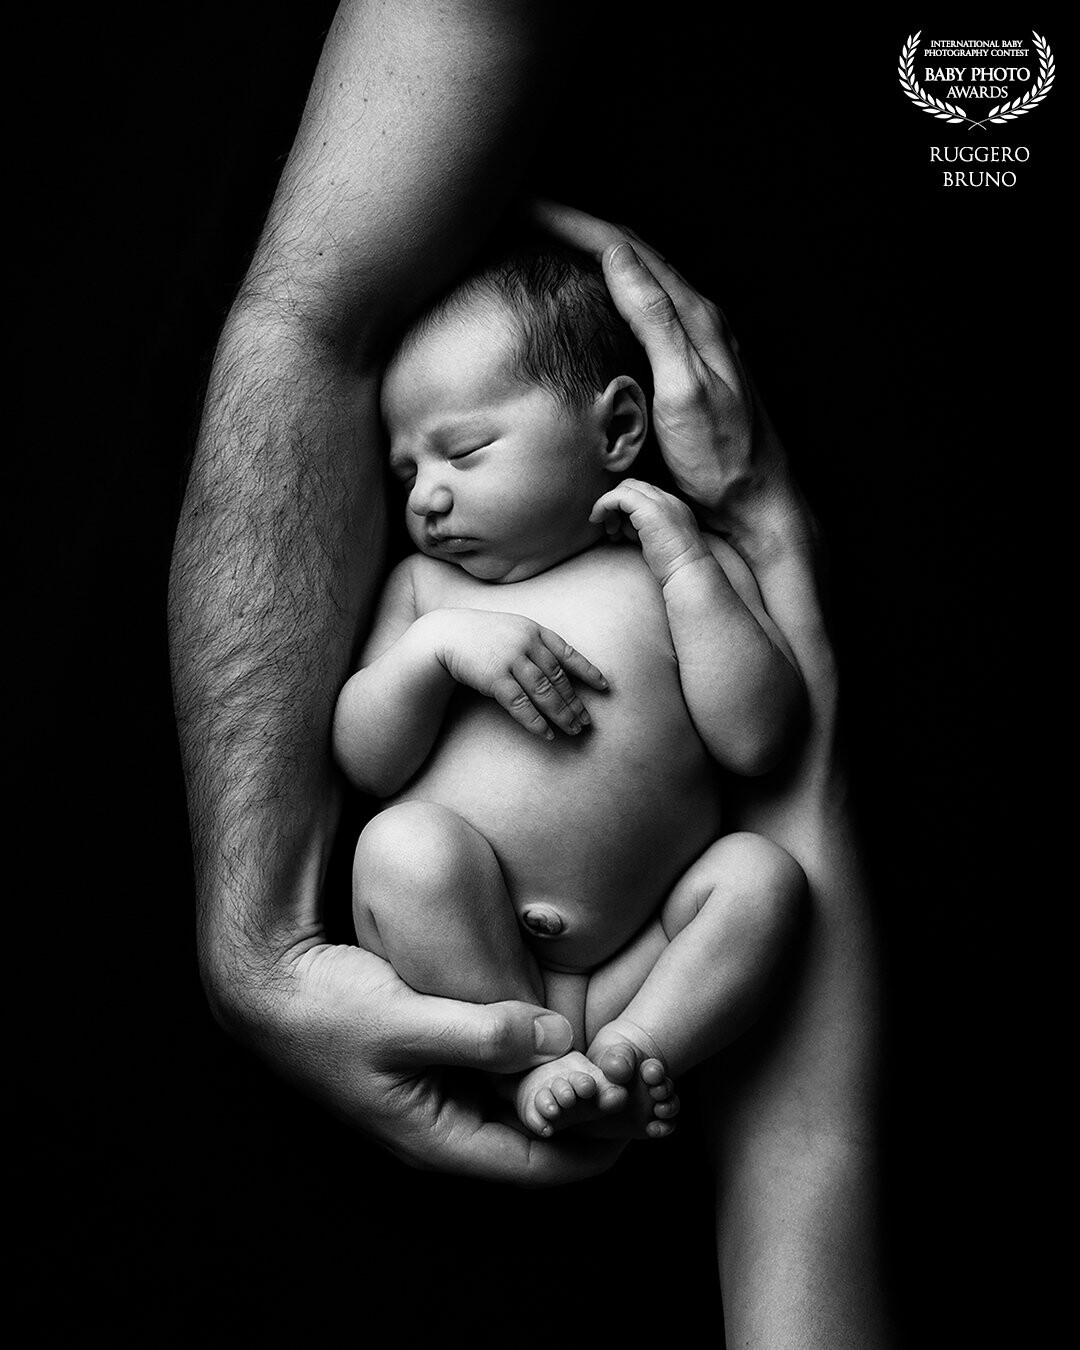 From the womb to the arms<br />
<br />
A silent shot like a sotto voce narration where the light rests gracefully on the subjects.<br />
The details emphasize and describe the intensity of this process such as the hands that rest, contain and embrace: we see what the parents feel without seeing their gaze.